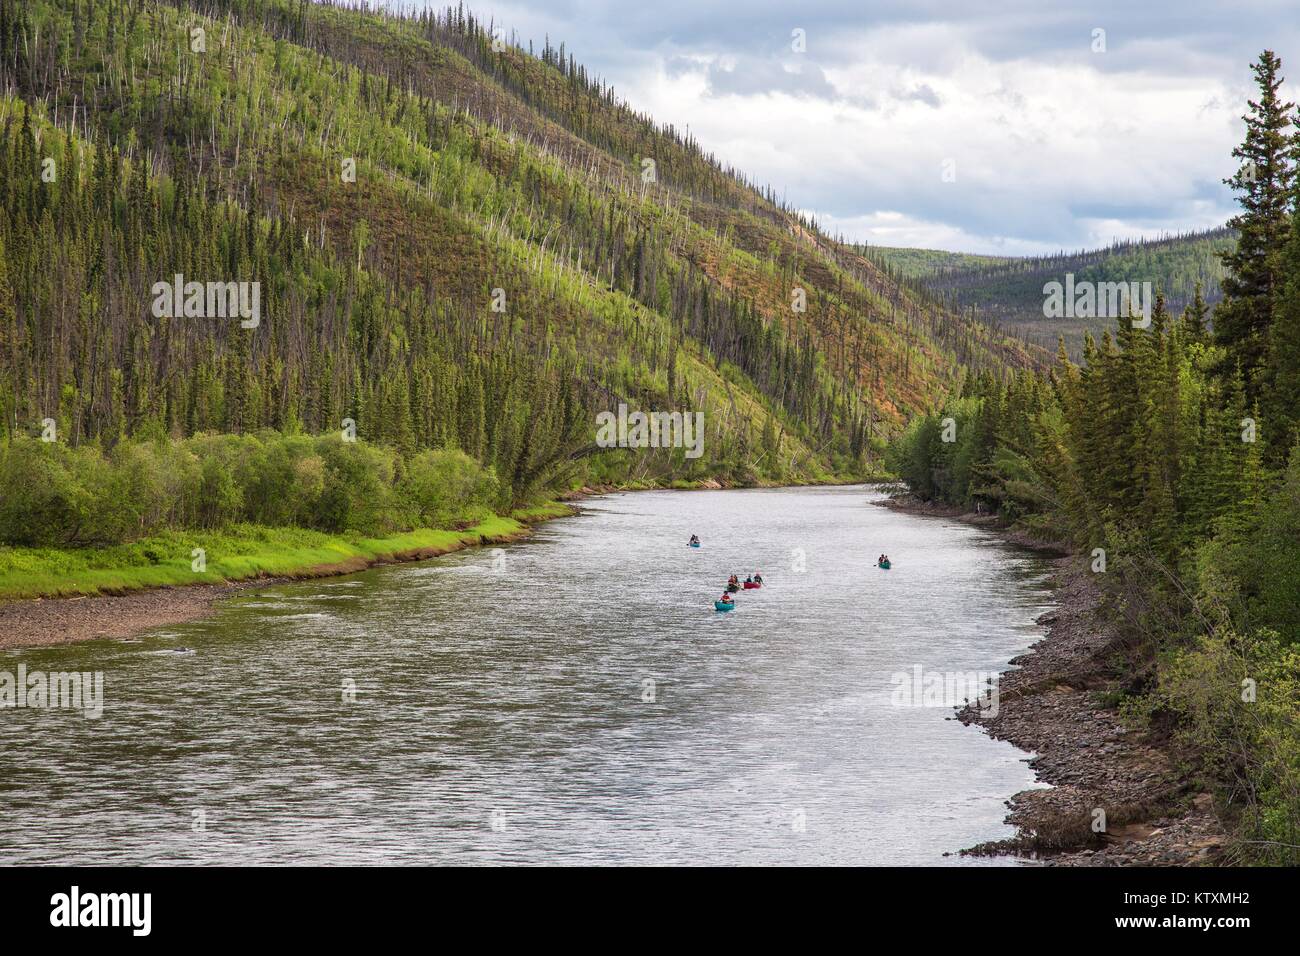 Tourists canoe down the Fortymile Wild and Scenic River June 15, 2014 in Alaska. Stock Photo